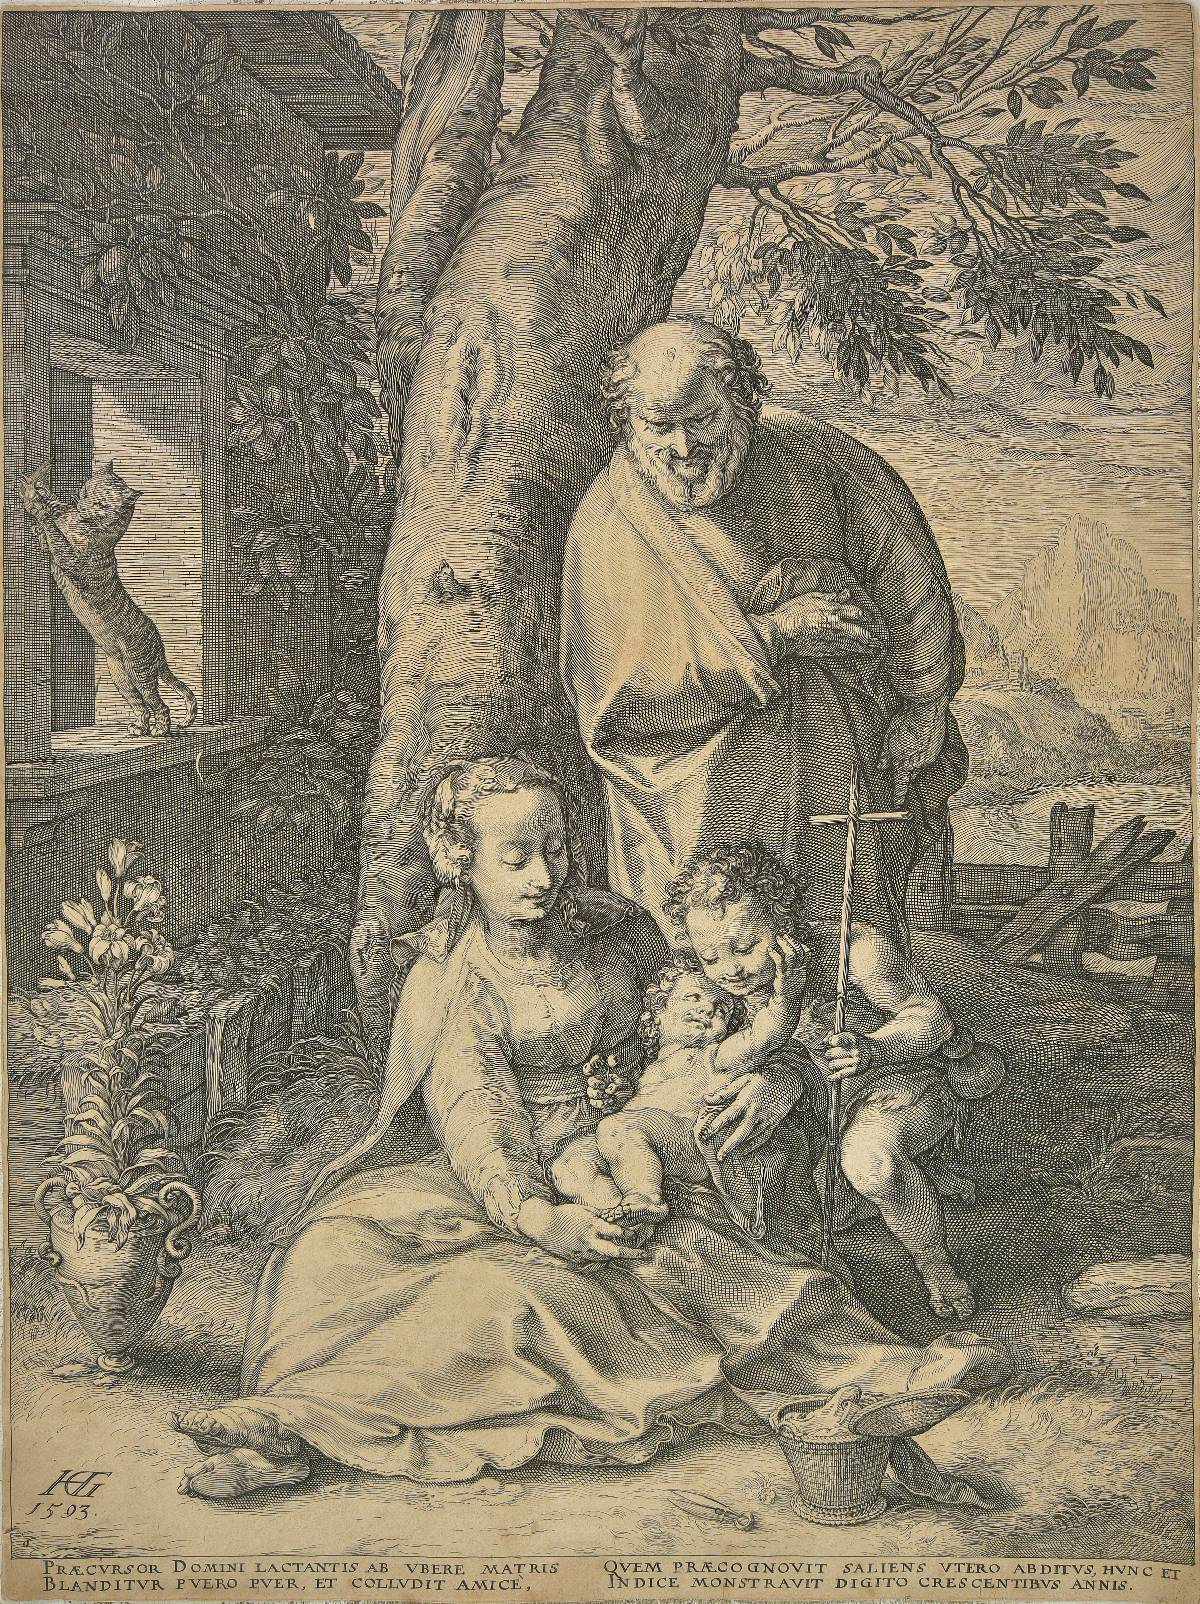 *Goltzius (Hendrik, 1558-1617). The Holy Family with Saint John, after Federico Barocci, 1593,